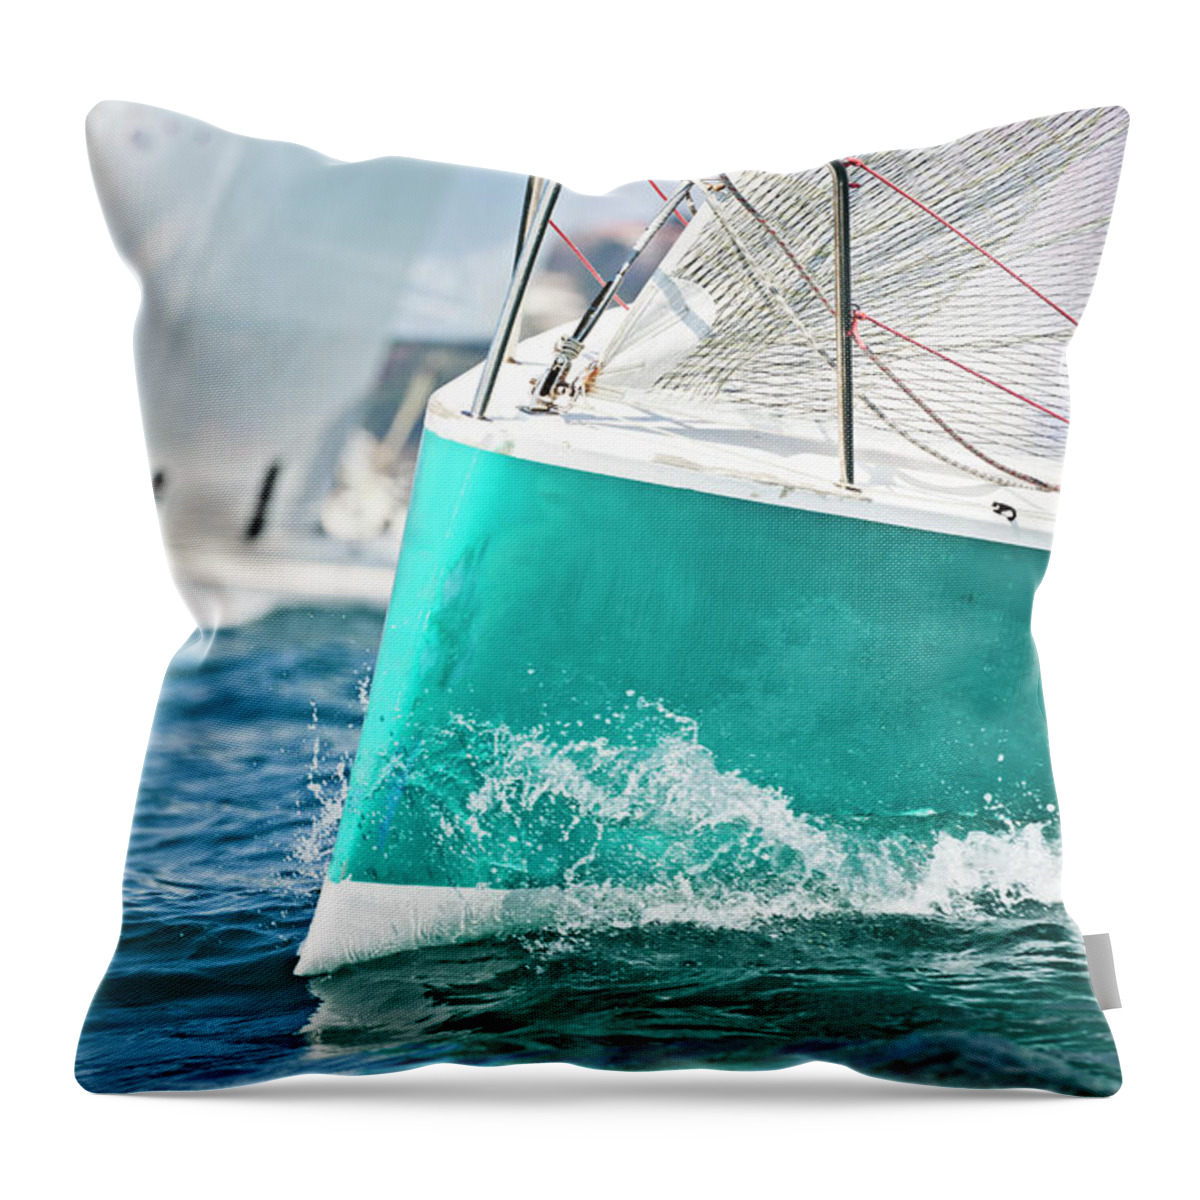 Wind Throw Pillow featuring the photograph Front Of A Sailing Boat In A Regatta by Gaspr13